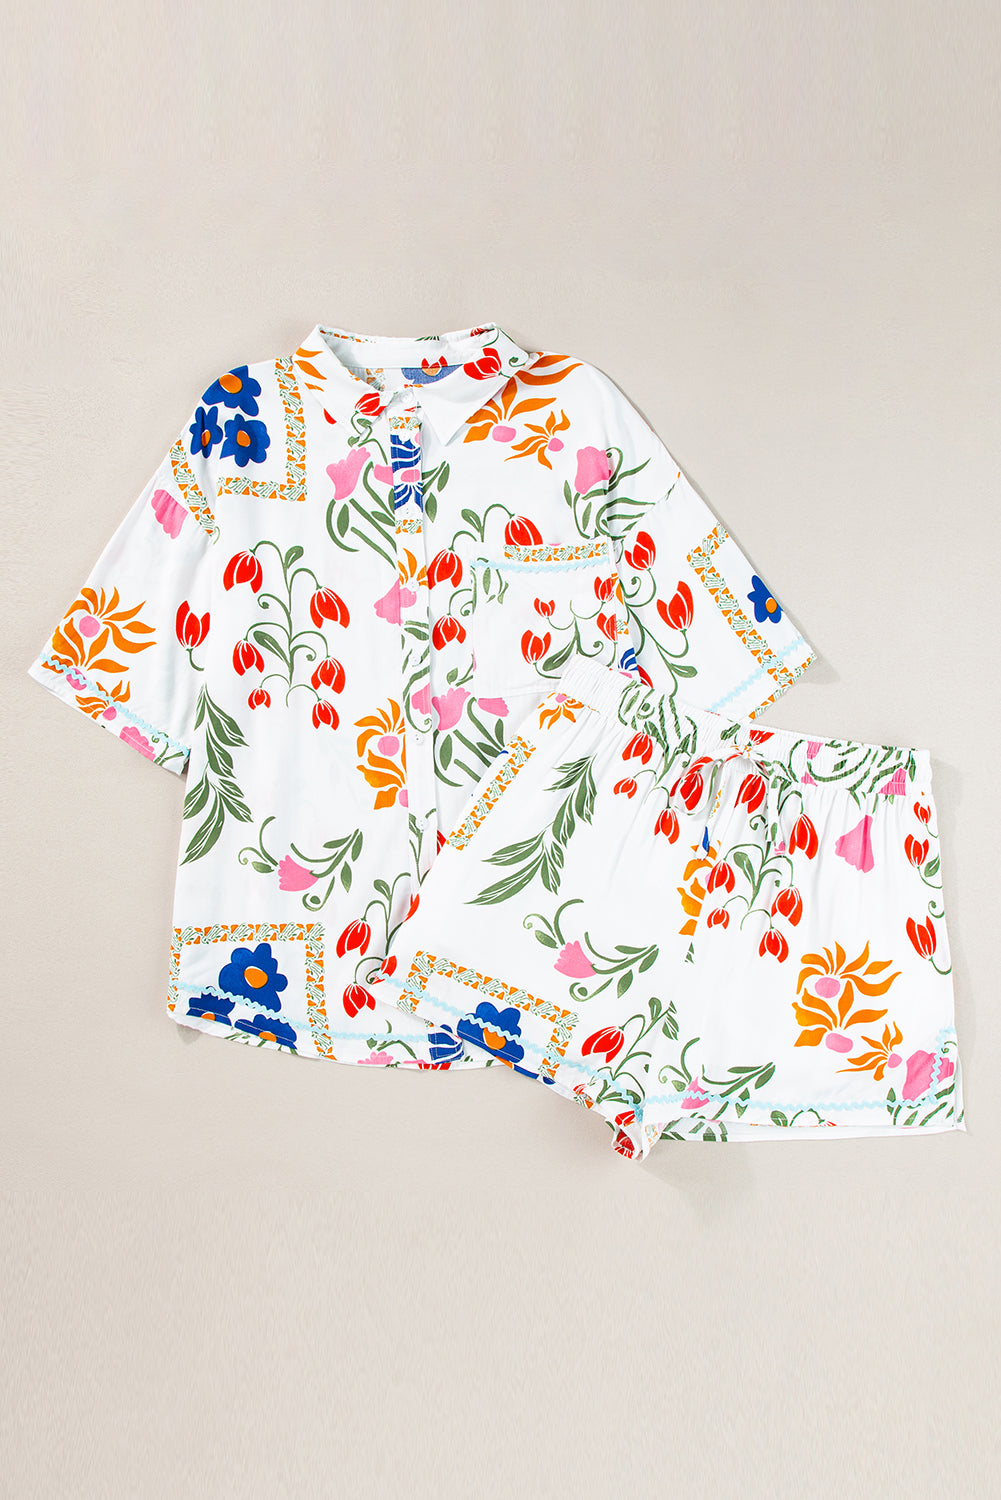 Ricrac Trim Floral Short Sleeve Shirt and Shorts Outfit